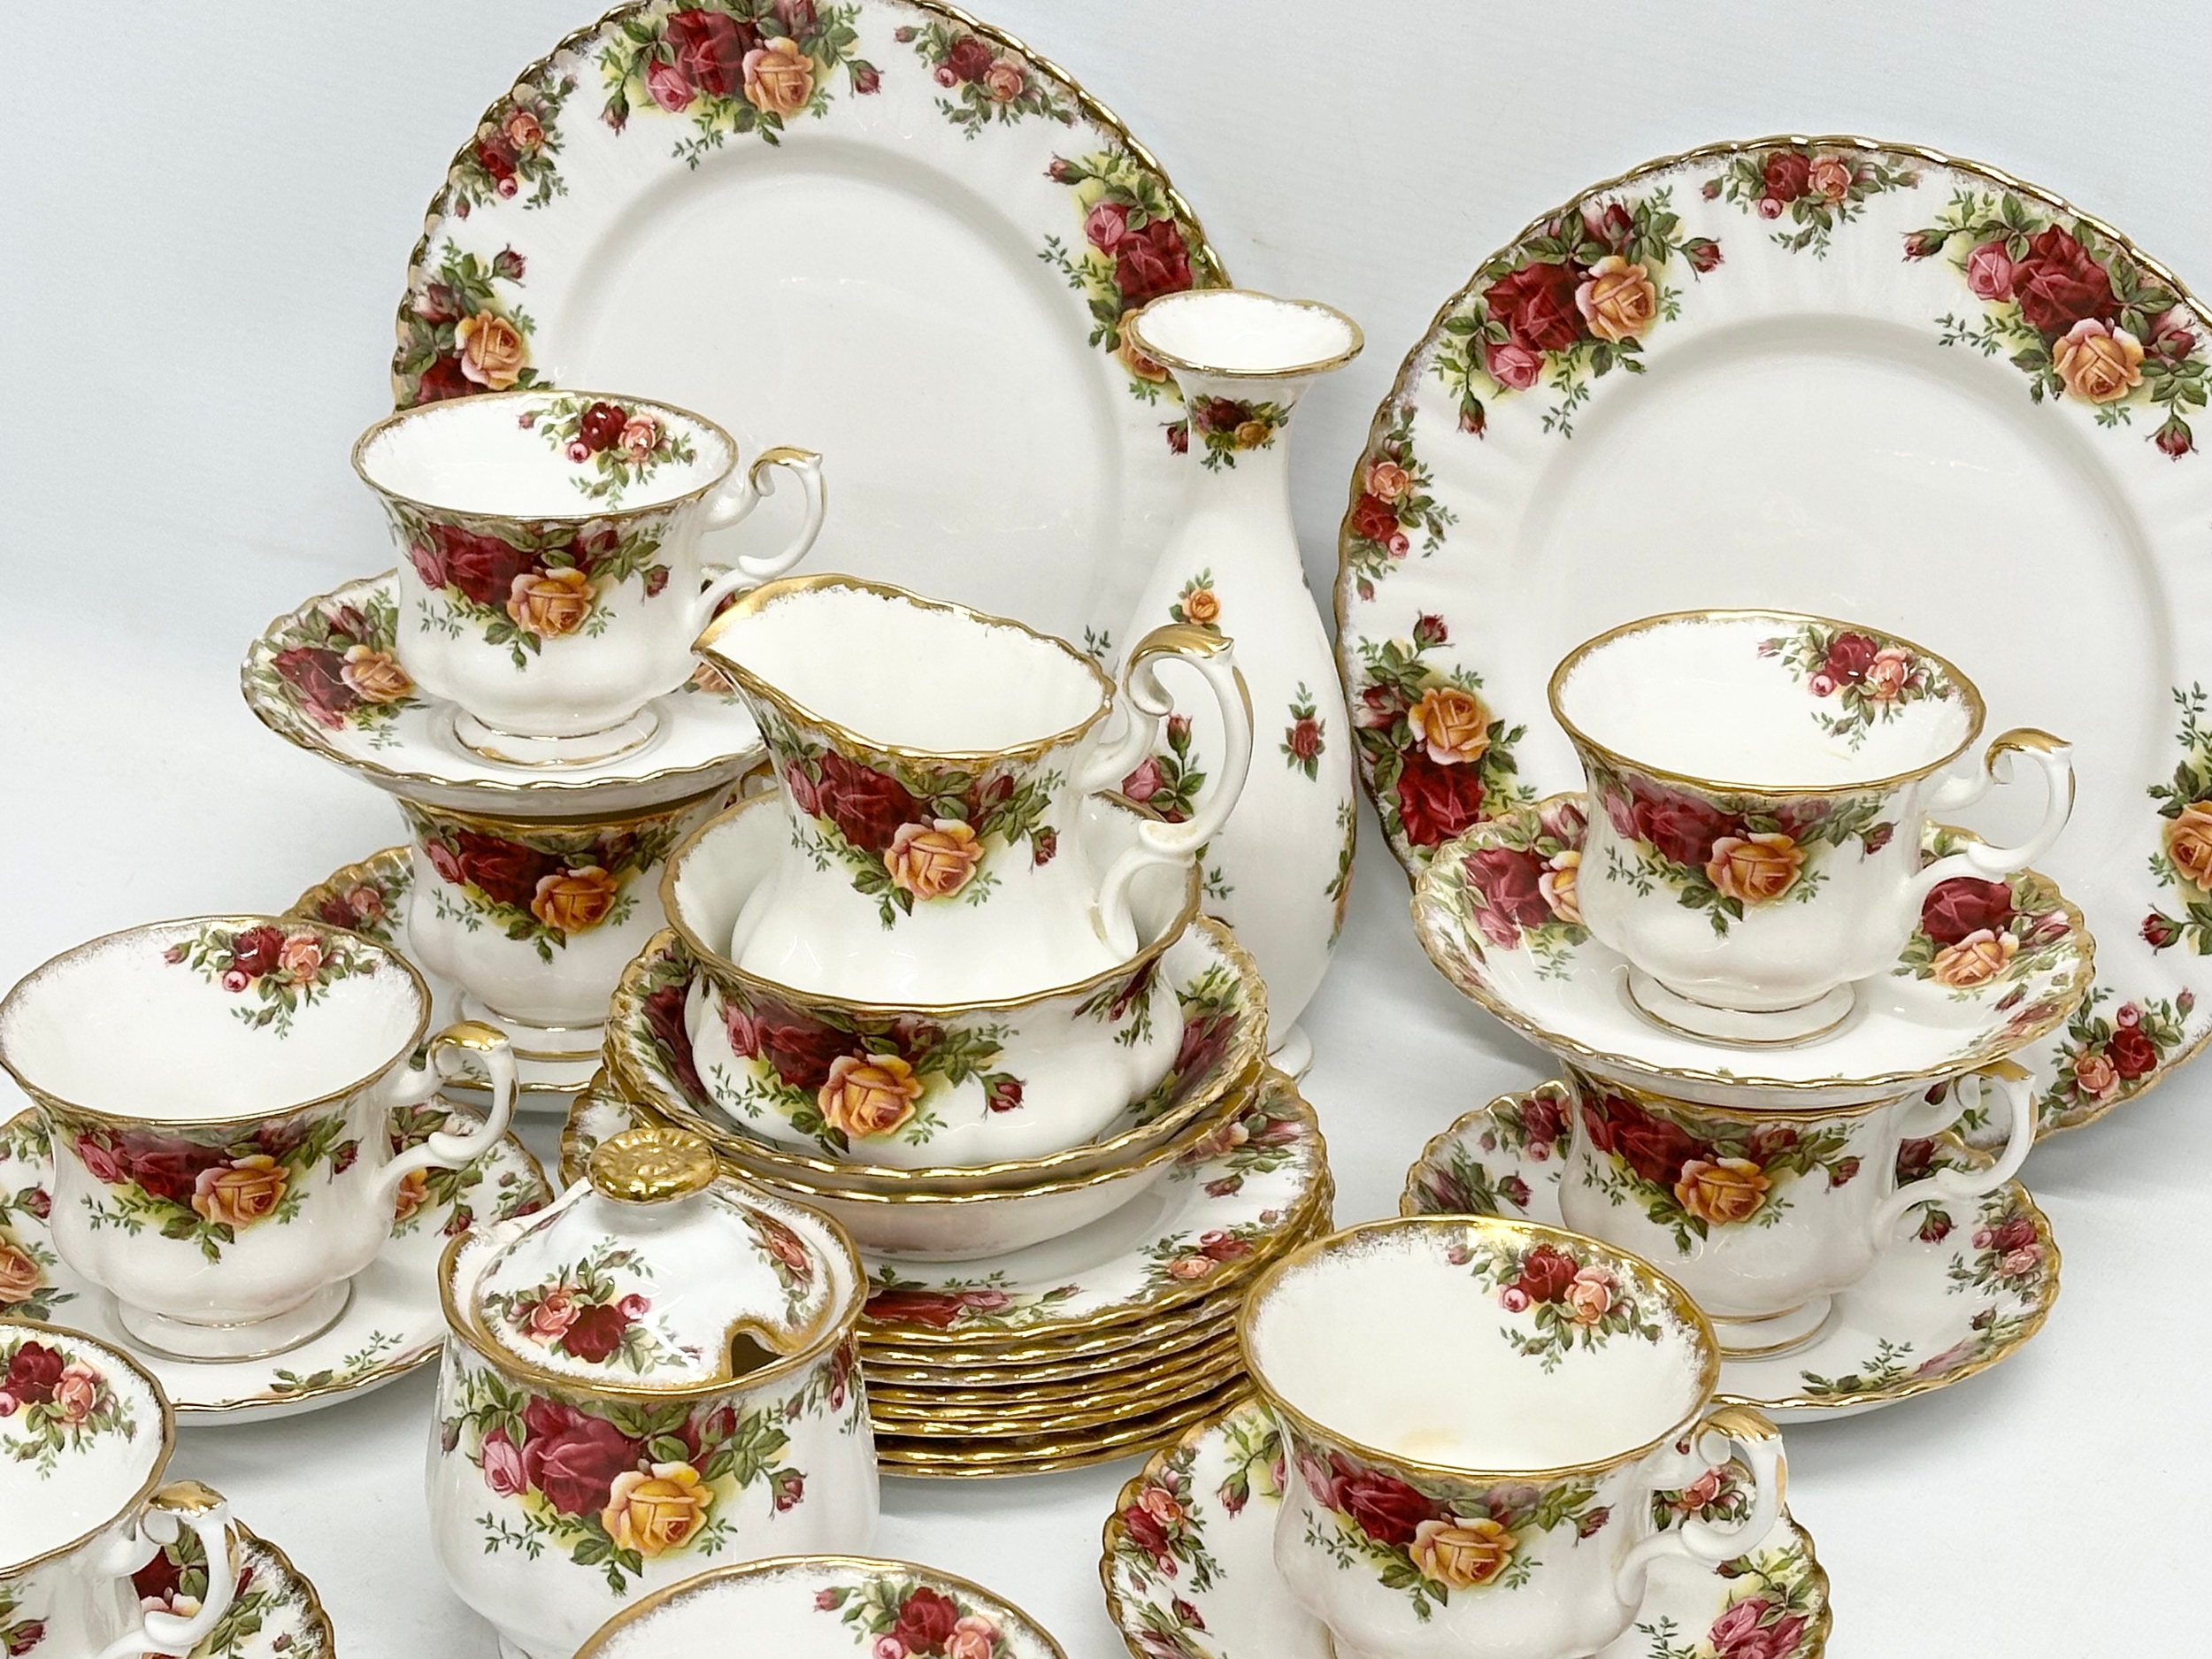 32 piece of Royal Albert ‘Old Country Roses’ tea service. 2 salad plates, a vase, sugar bowl with - Image 2 of 6